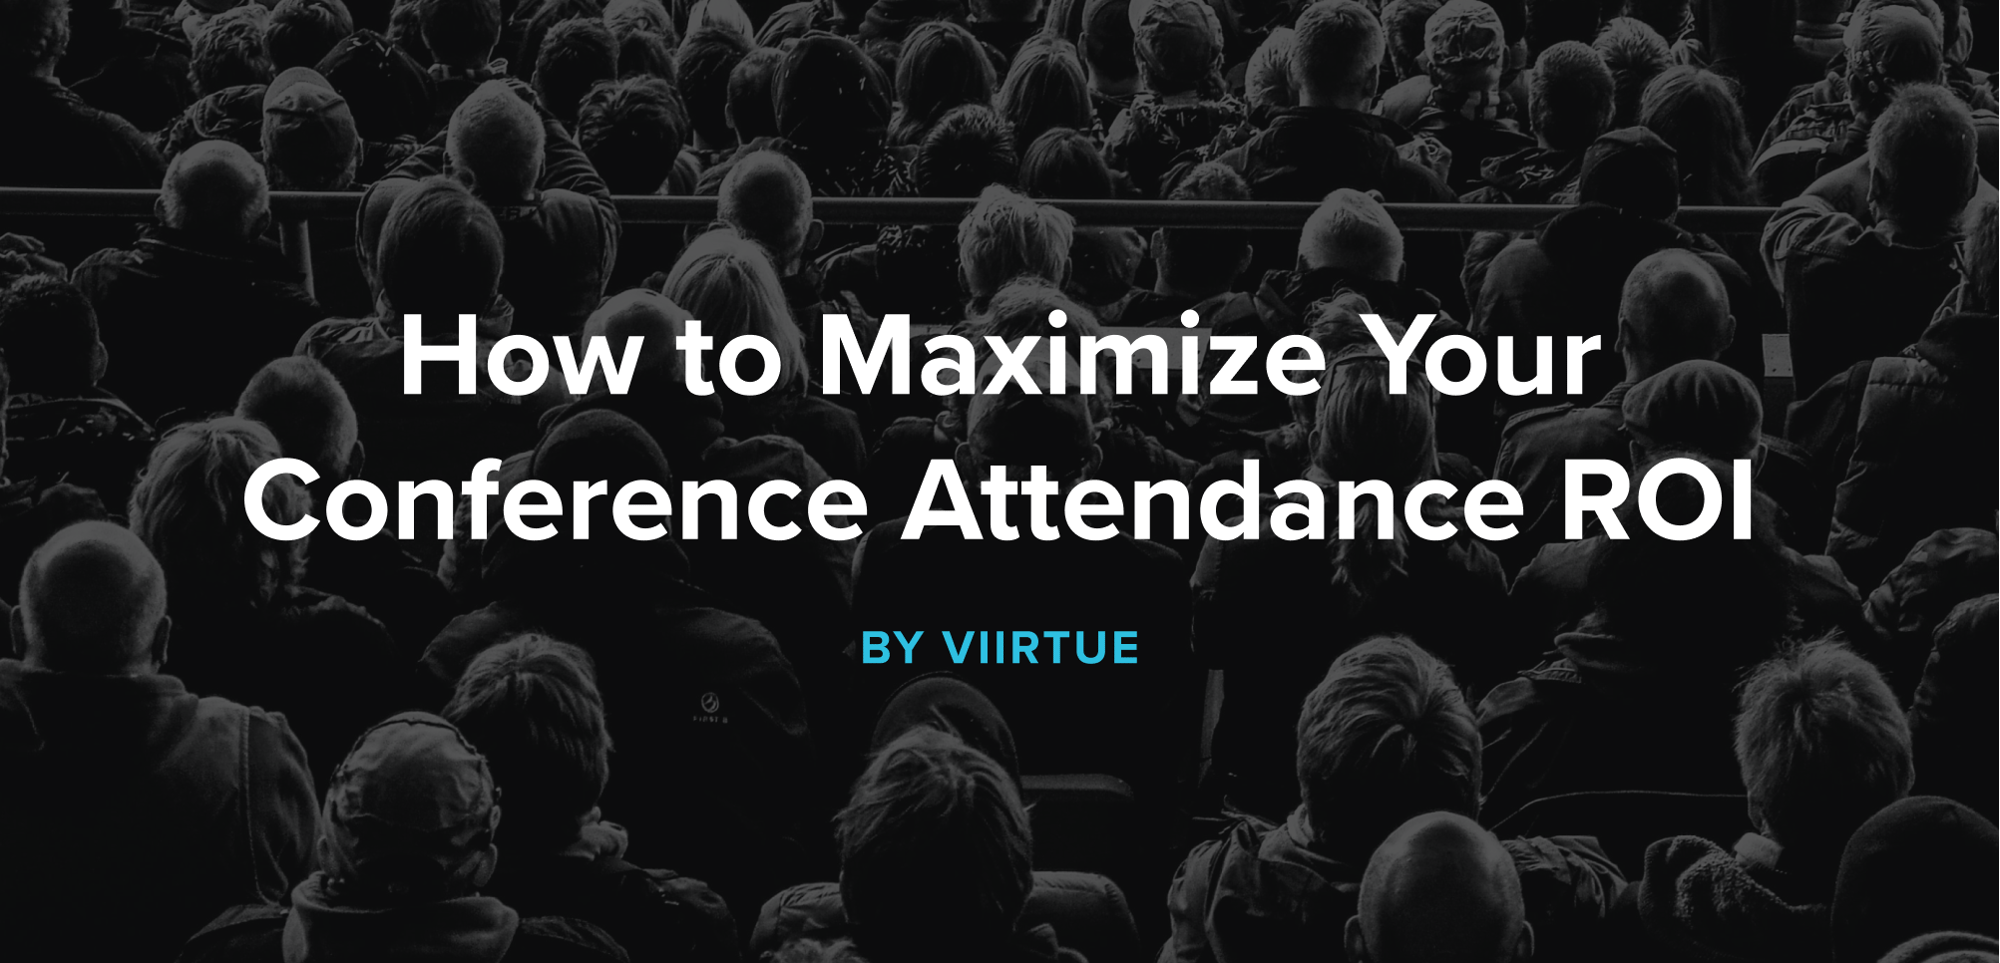 How to Maximize Your Conference Attendance ROI